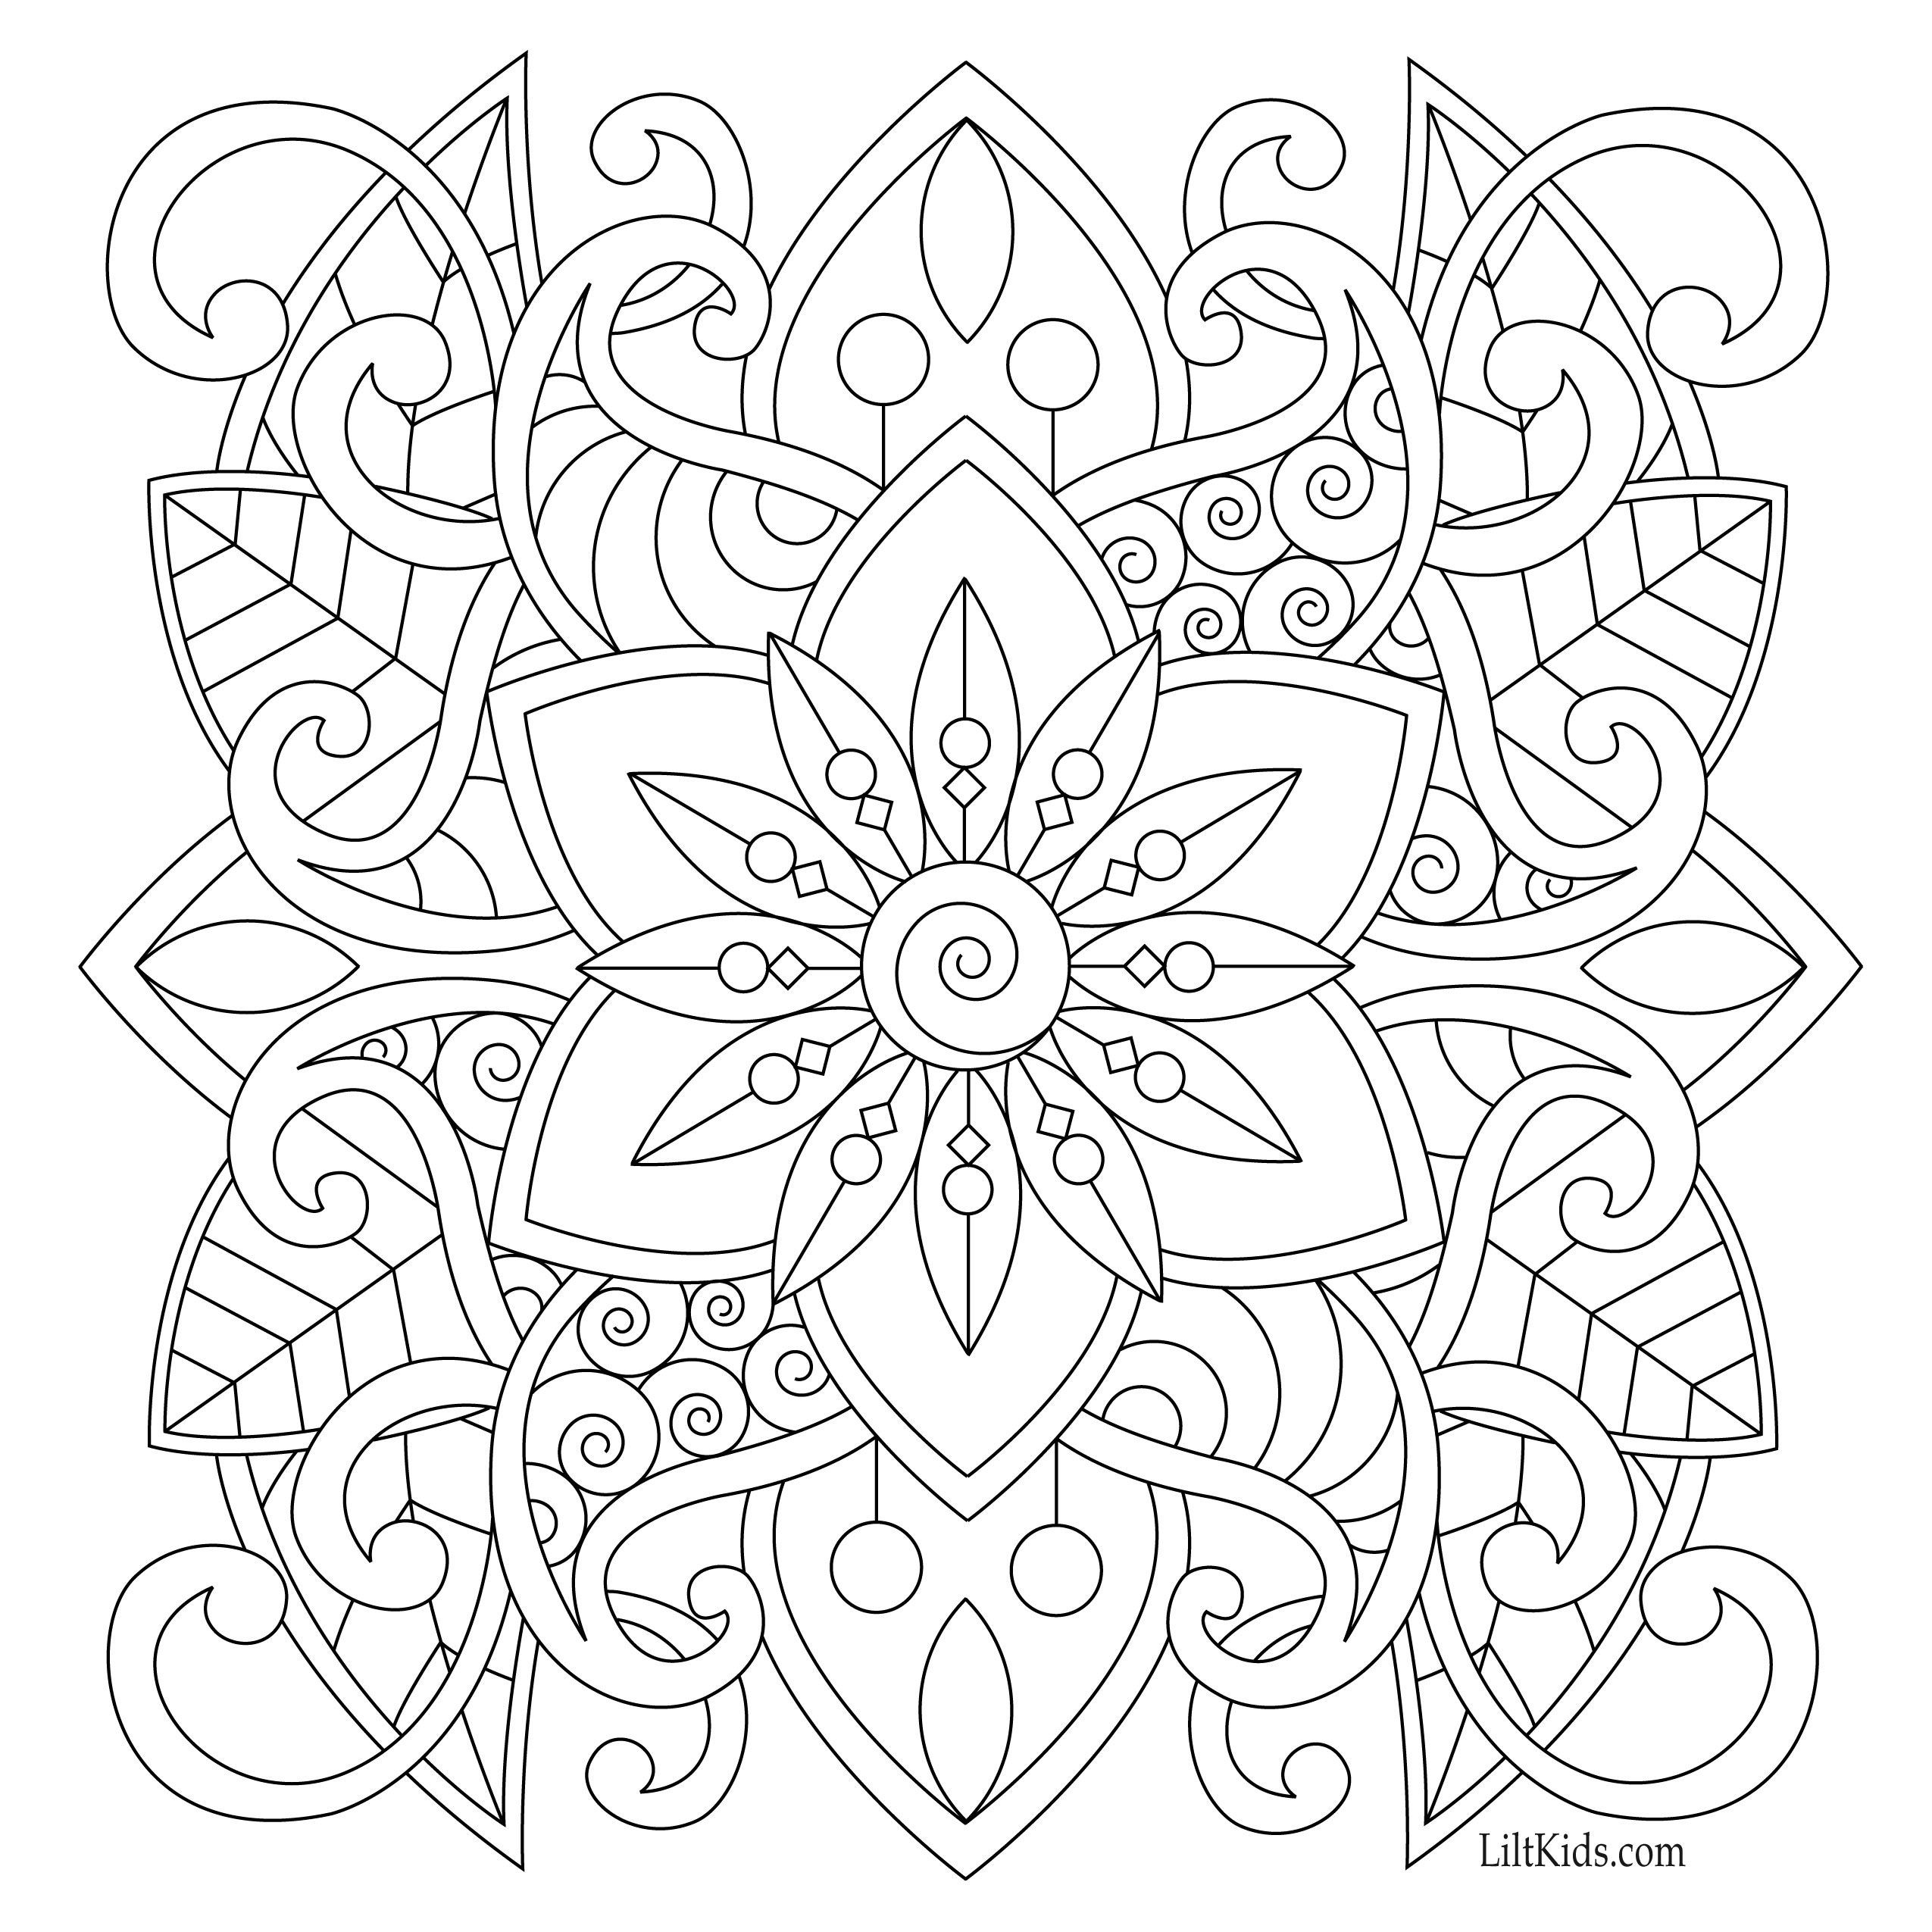 Simple Adult Coloring Books
 Free easy mandala for beginners adult coloring book image